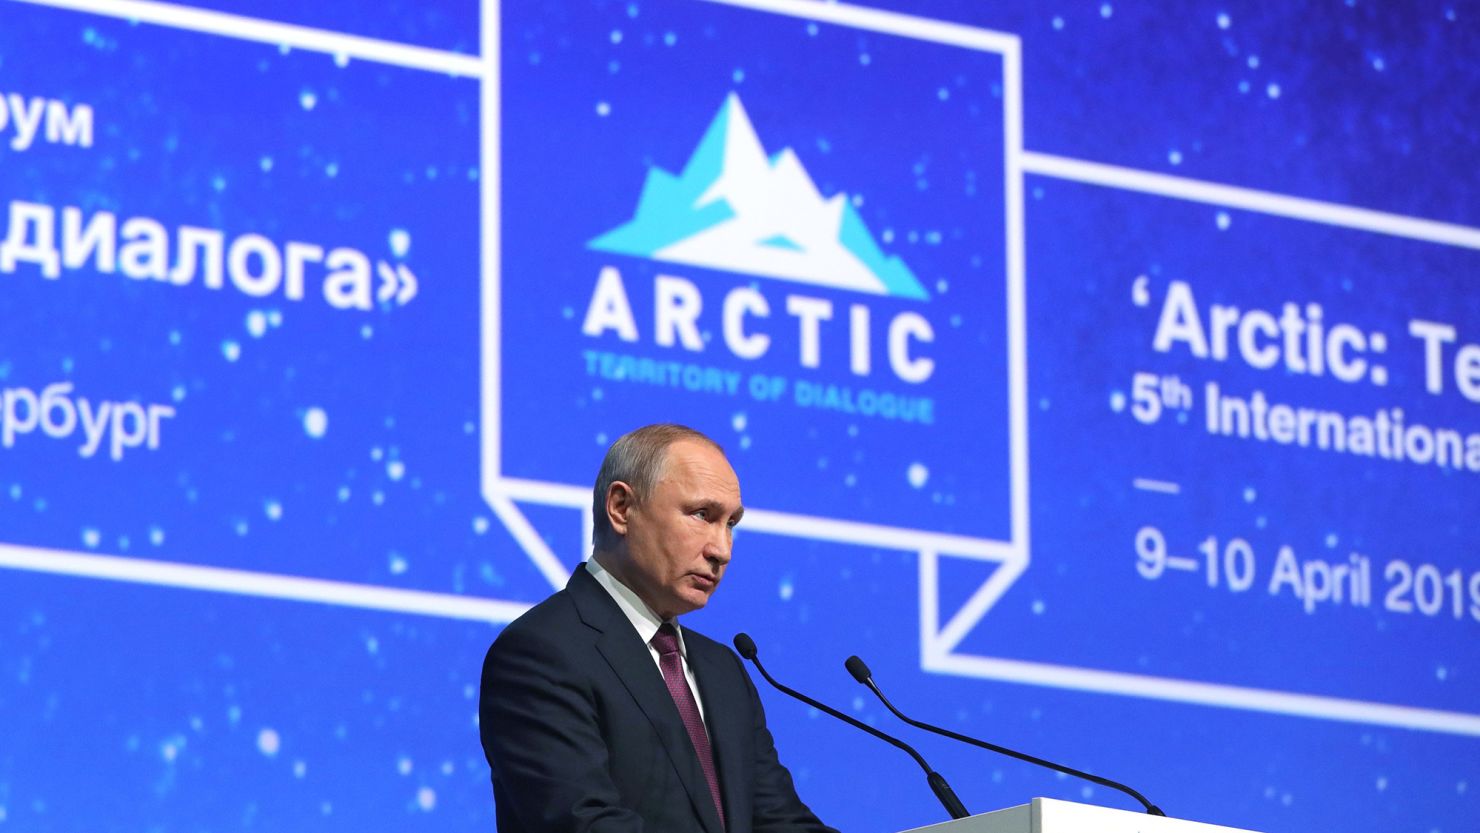 Russian President Vladimir Putin gives a speech during the International Arctic Forum in St. Petersburg on April 9, 2019. 